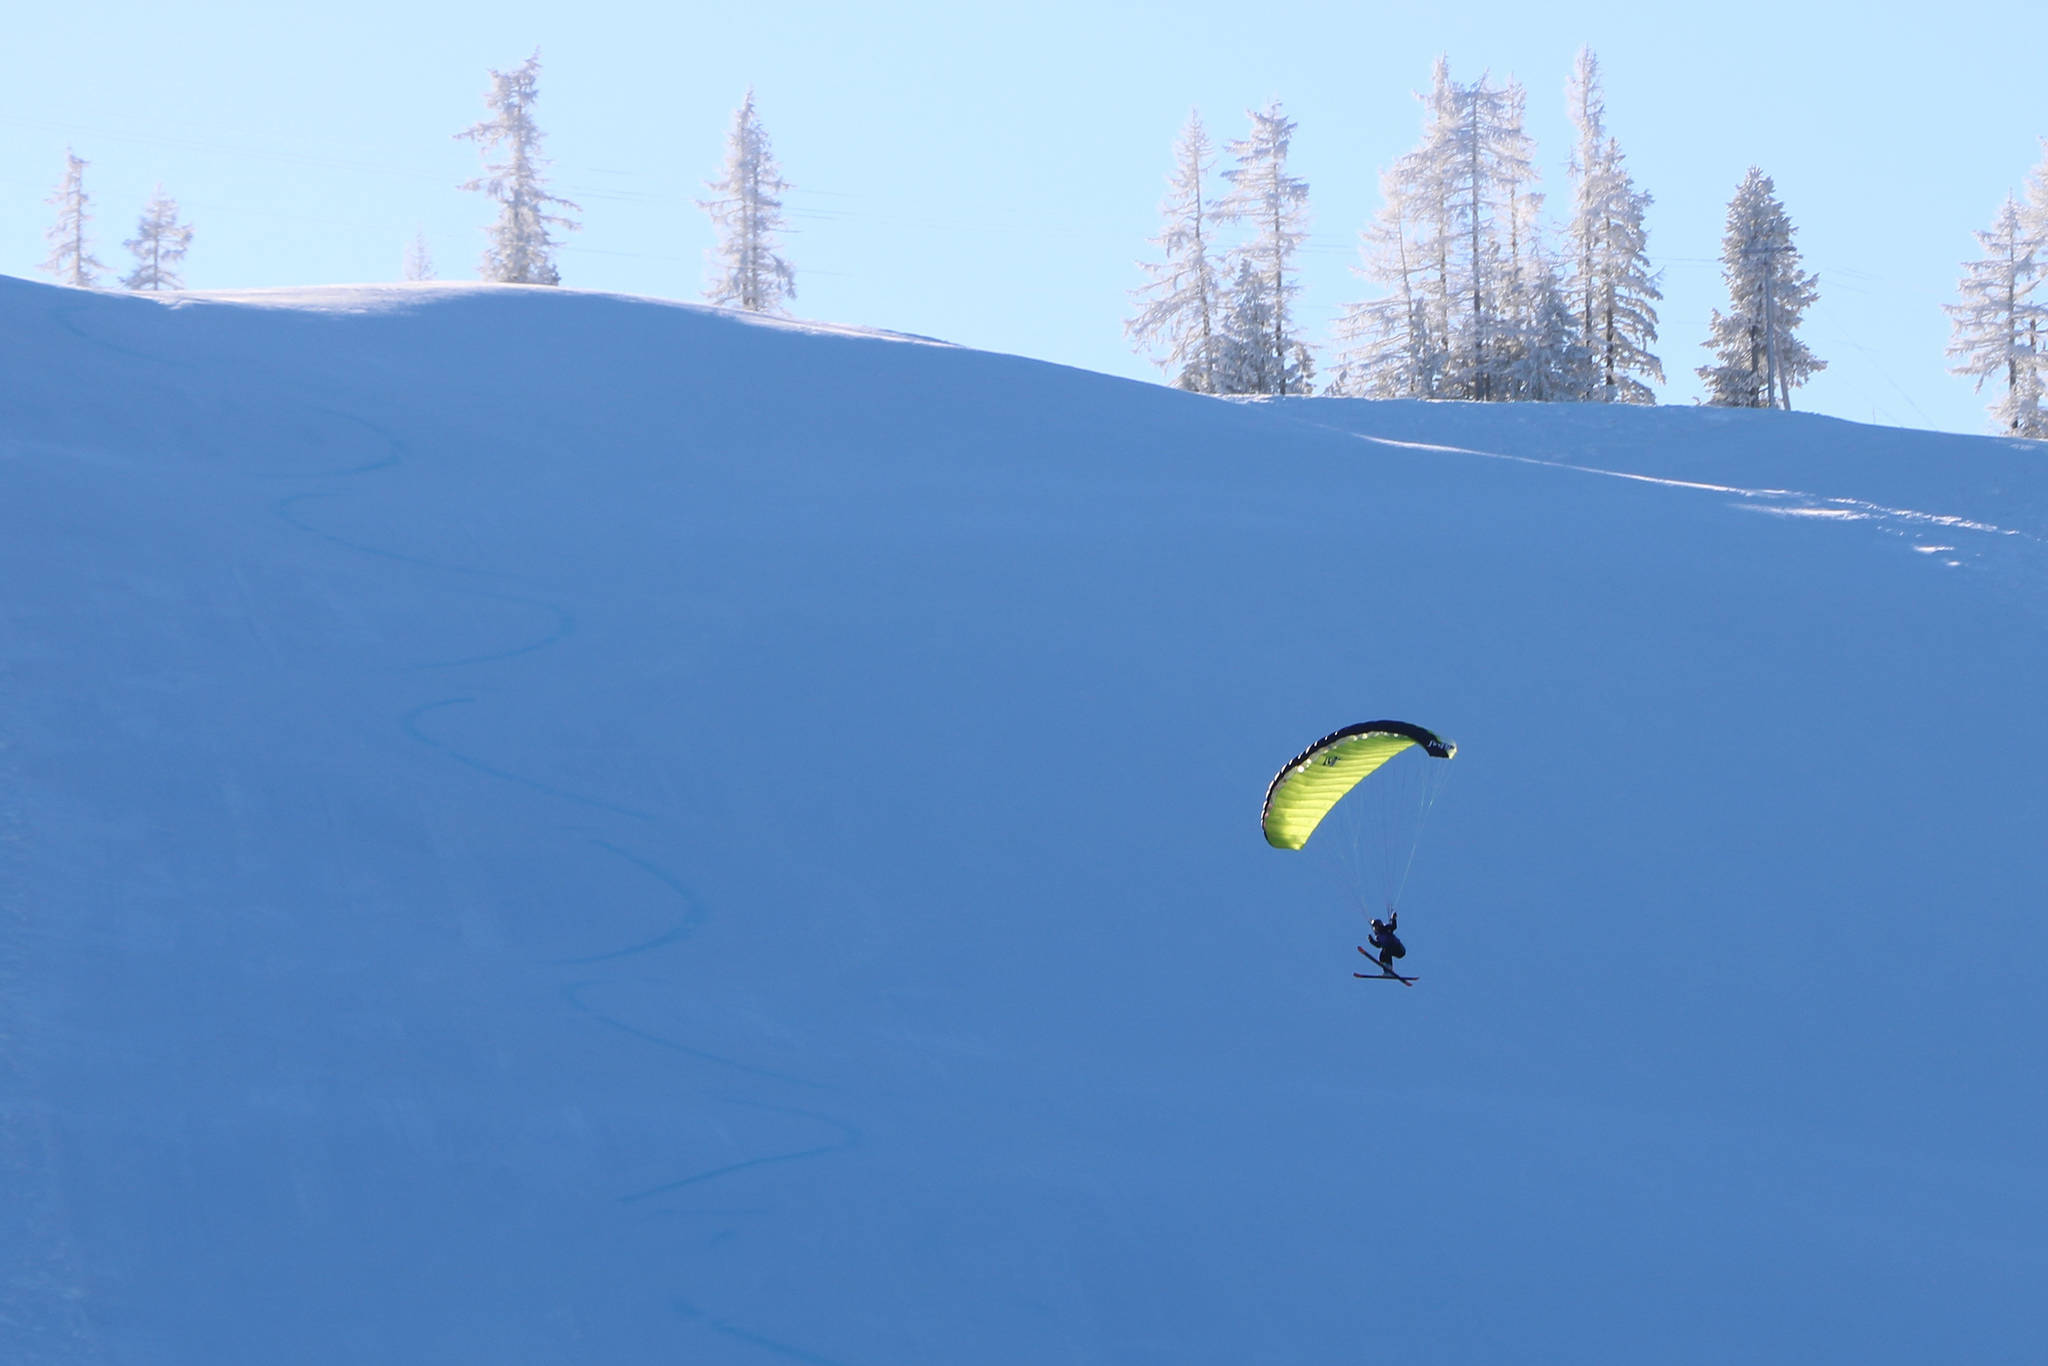 This “kite” skier floated through the air with the greatest of ease up at Red Mountain on a beautiful sunny day last week. Greater Trail municipalities are reminding residents to stay and play local. Photo: Jim Bailey.